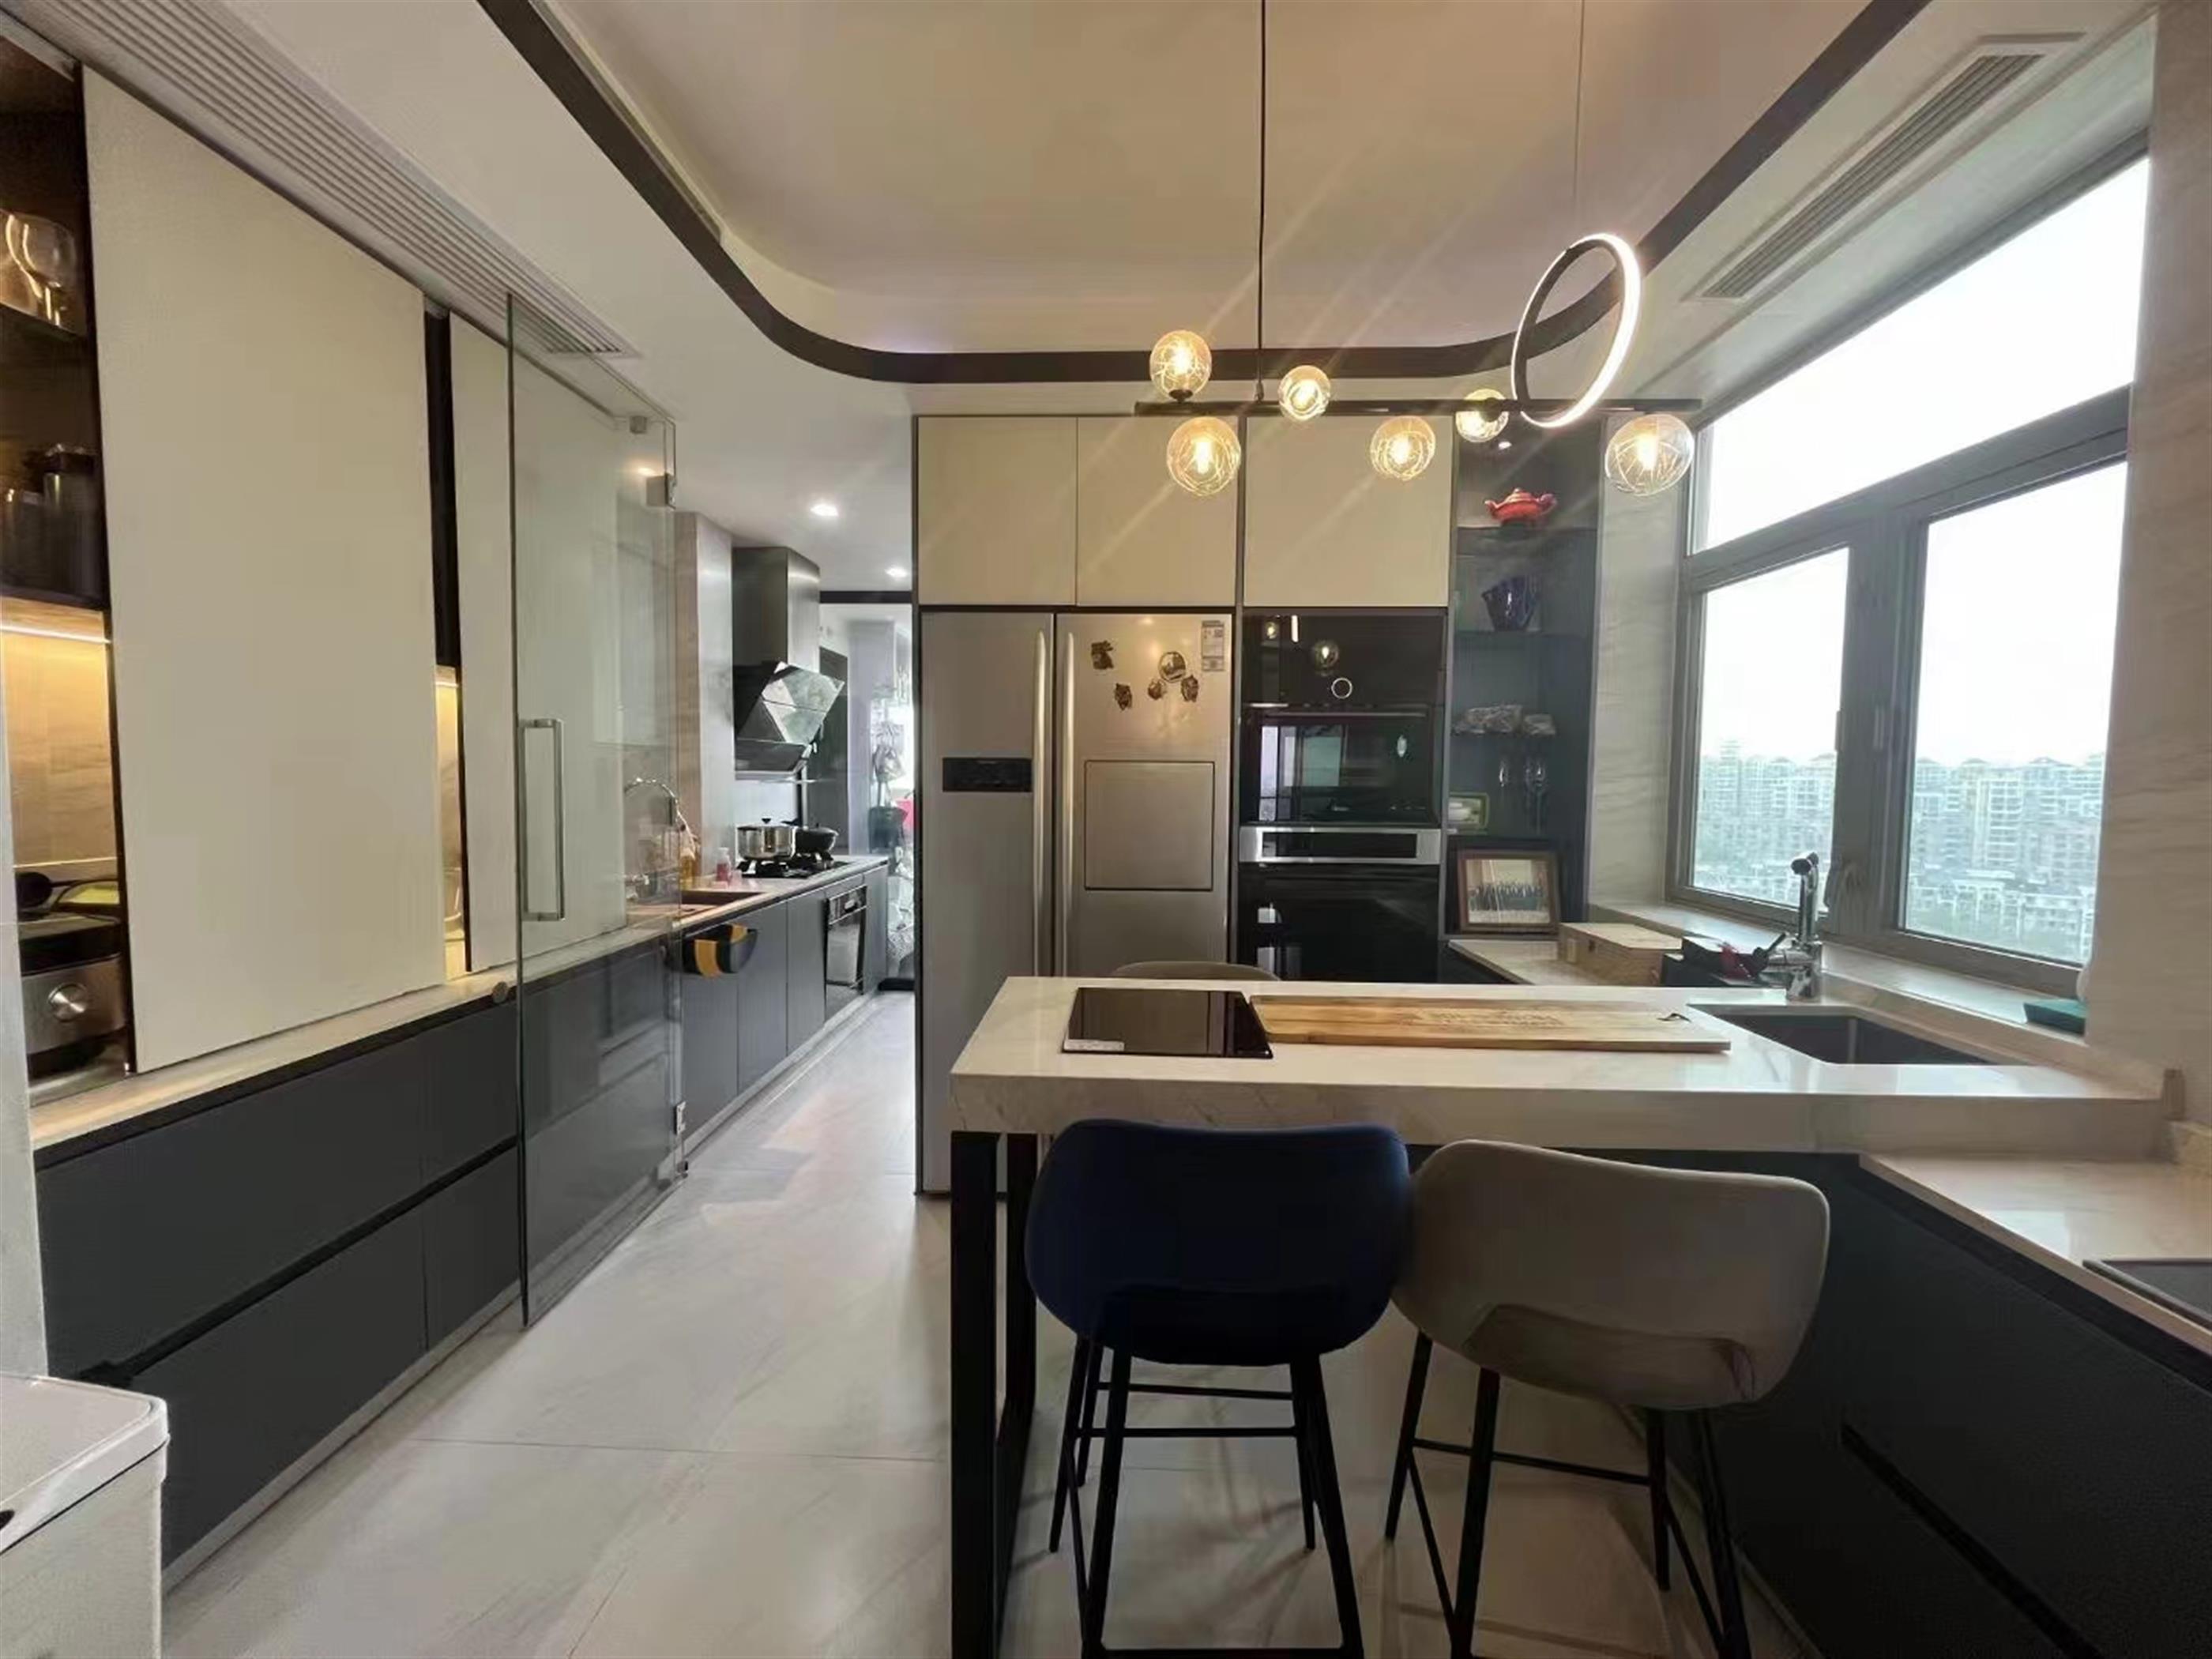 Open kitchen and kitchen island Classic Spacious Chic 3BR Apartment for Rent in Shanghai’s Jing’an Temple Neighborhood